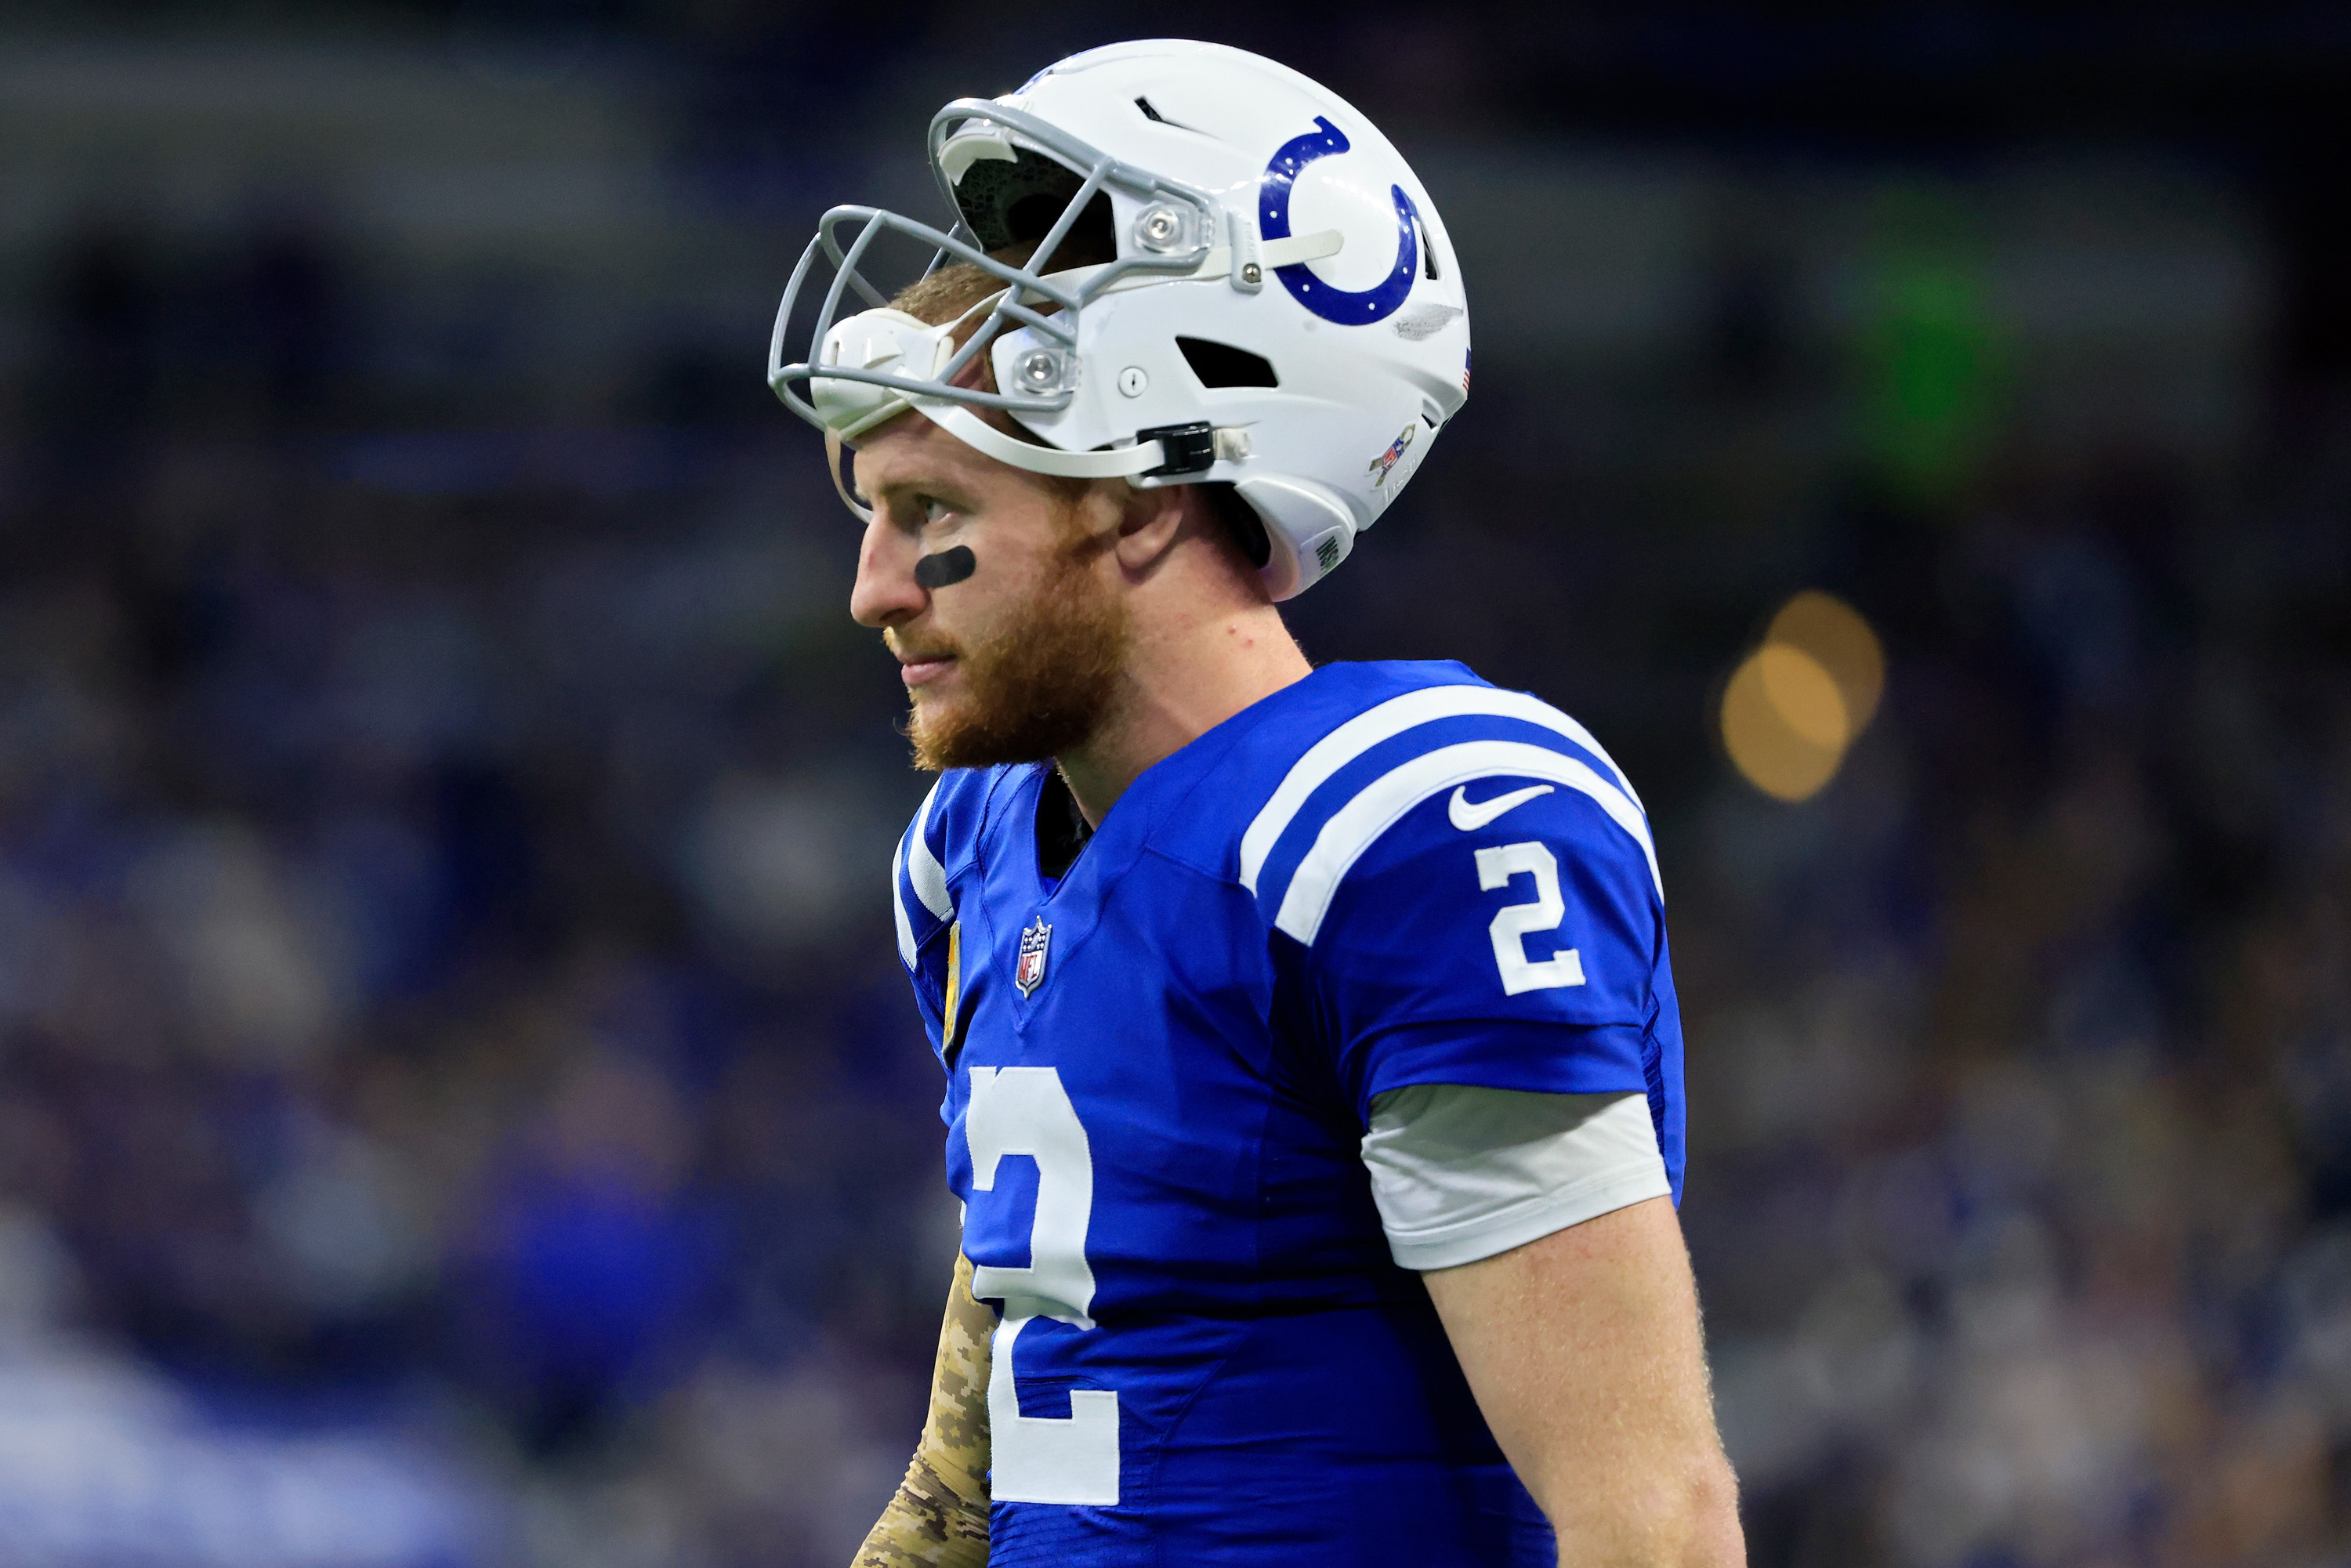 Former Eagles QB Carson Wentz in action for the Colts